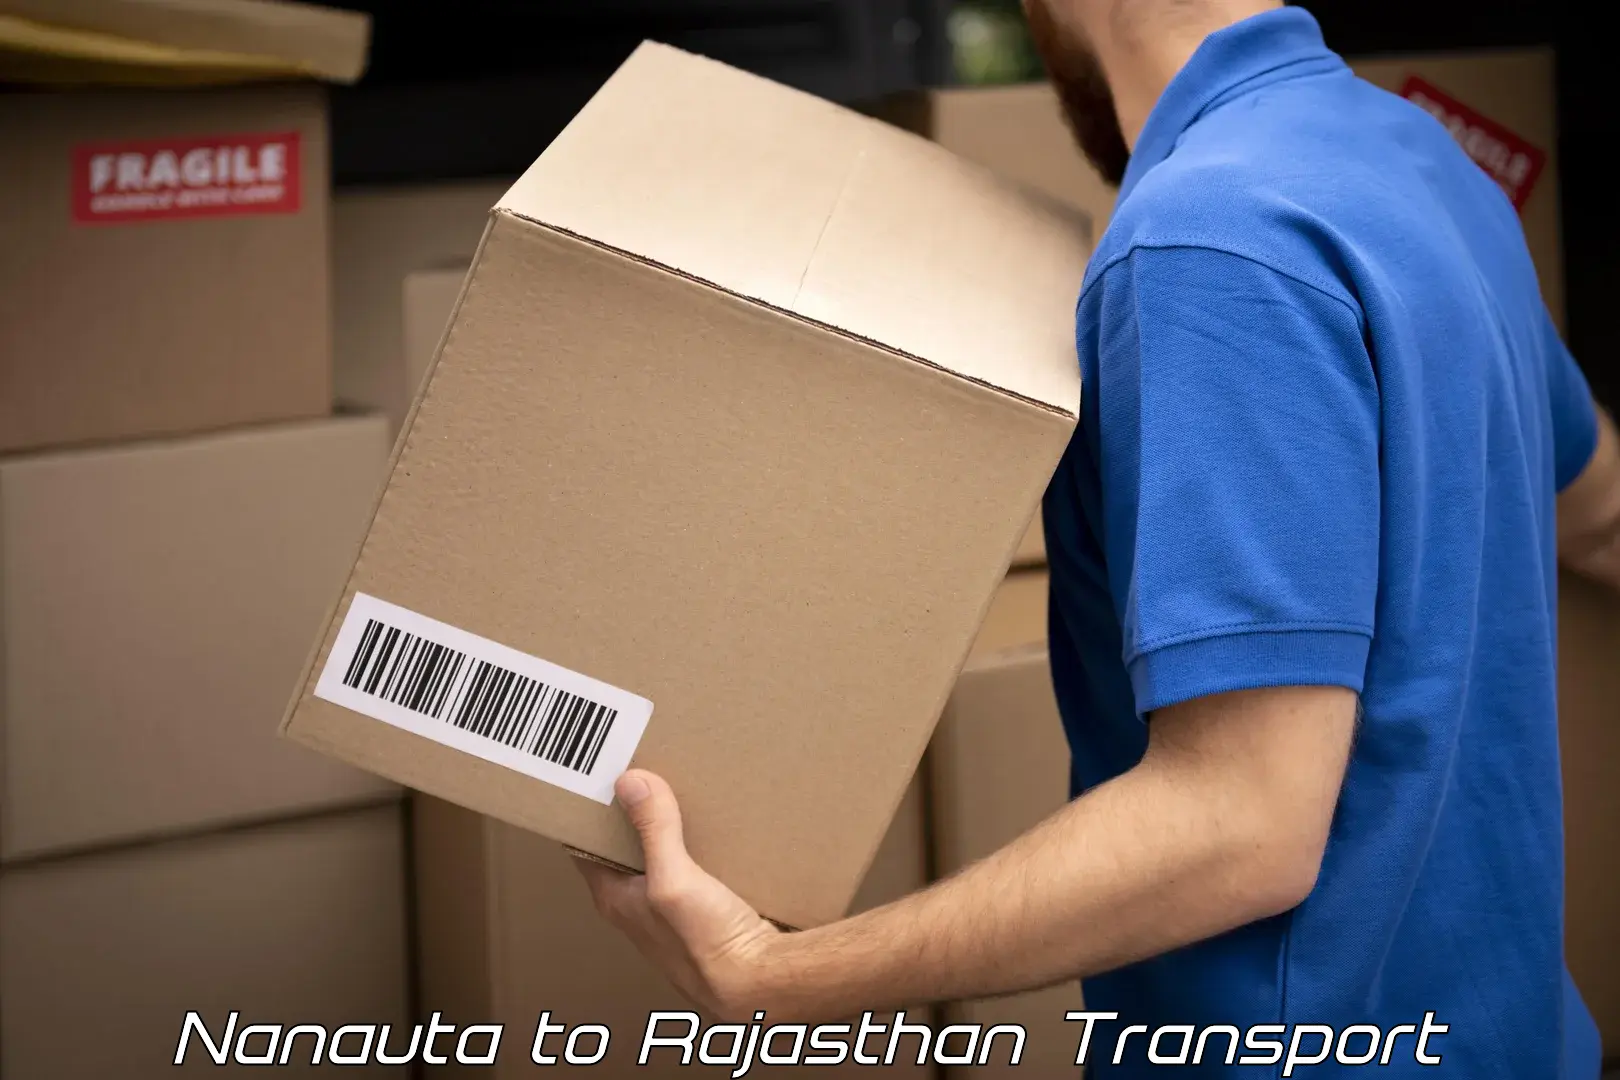 Road transport online services Nanauta to Udaipur